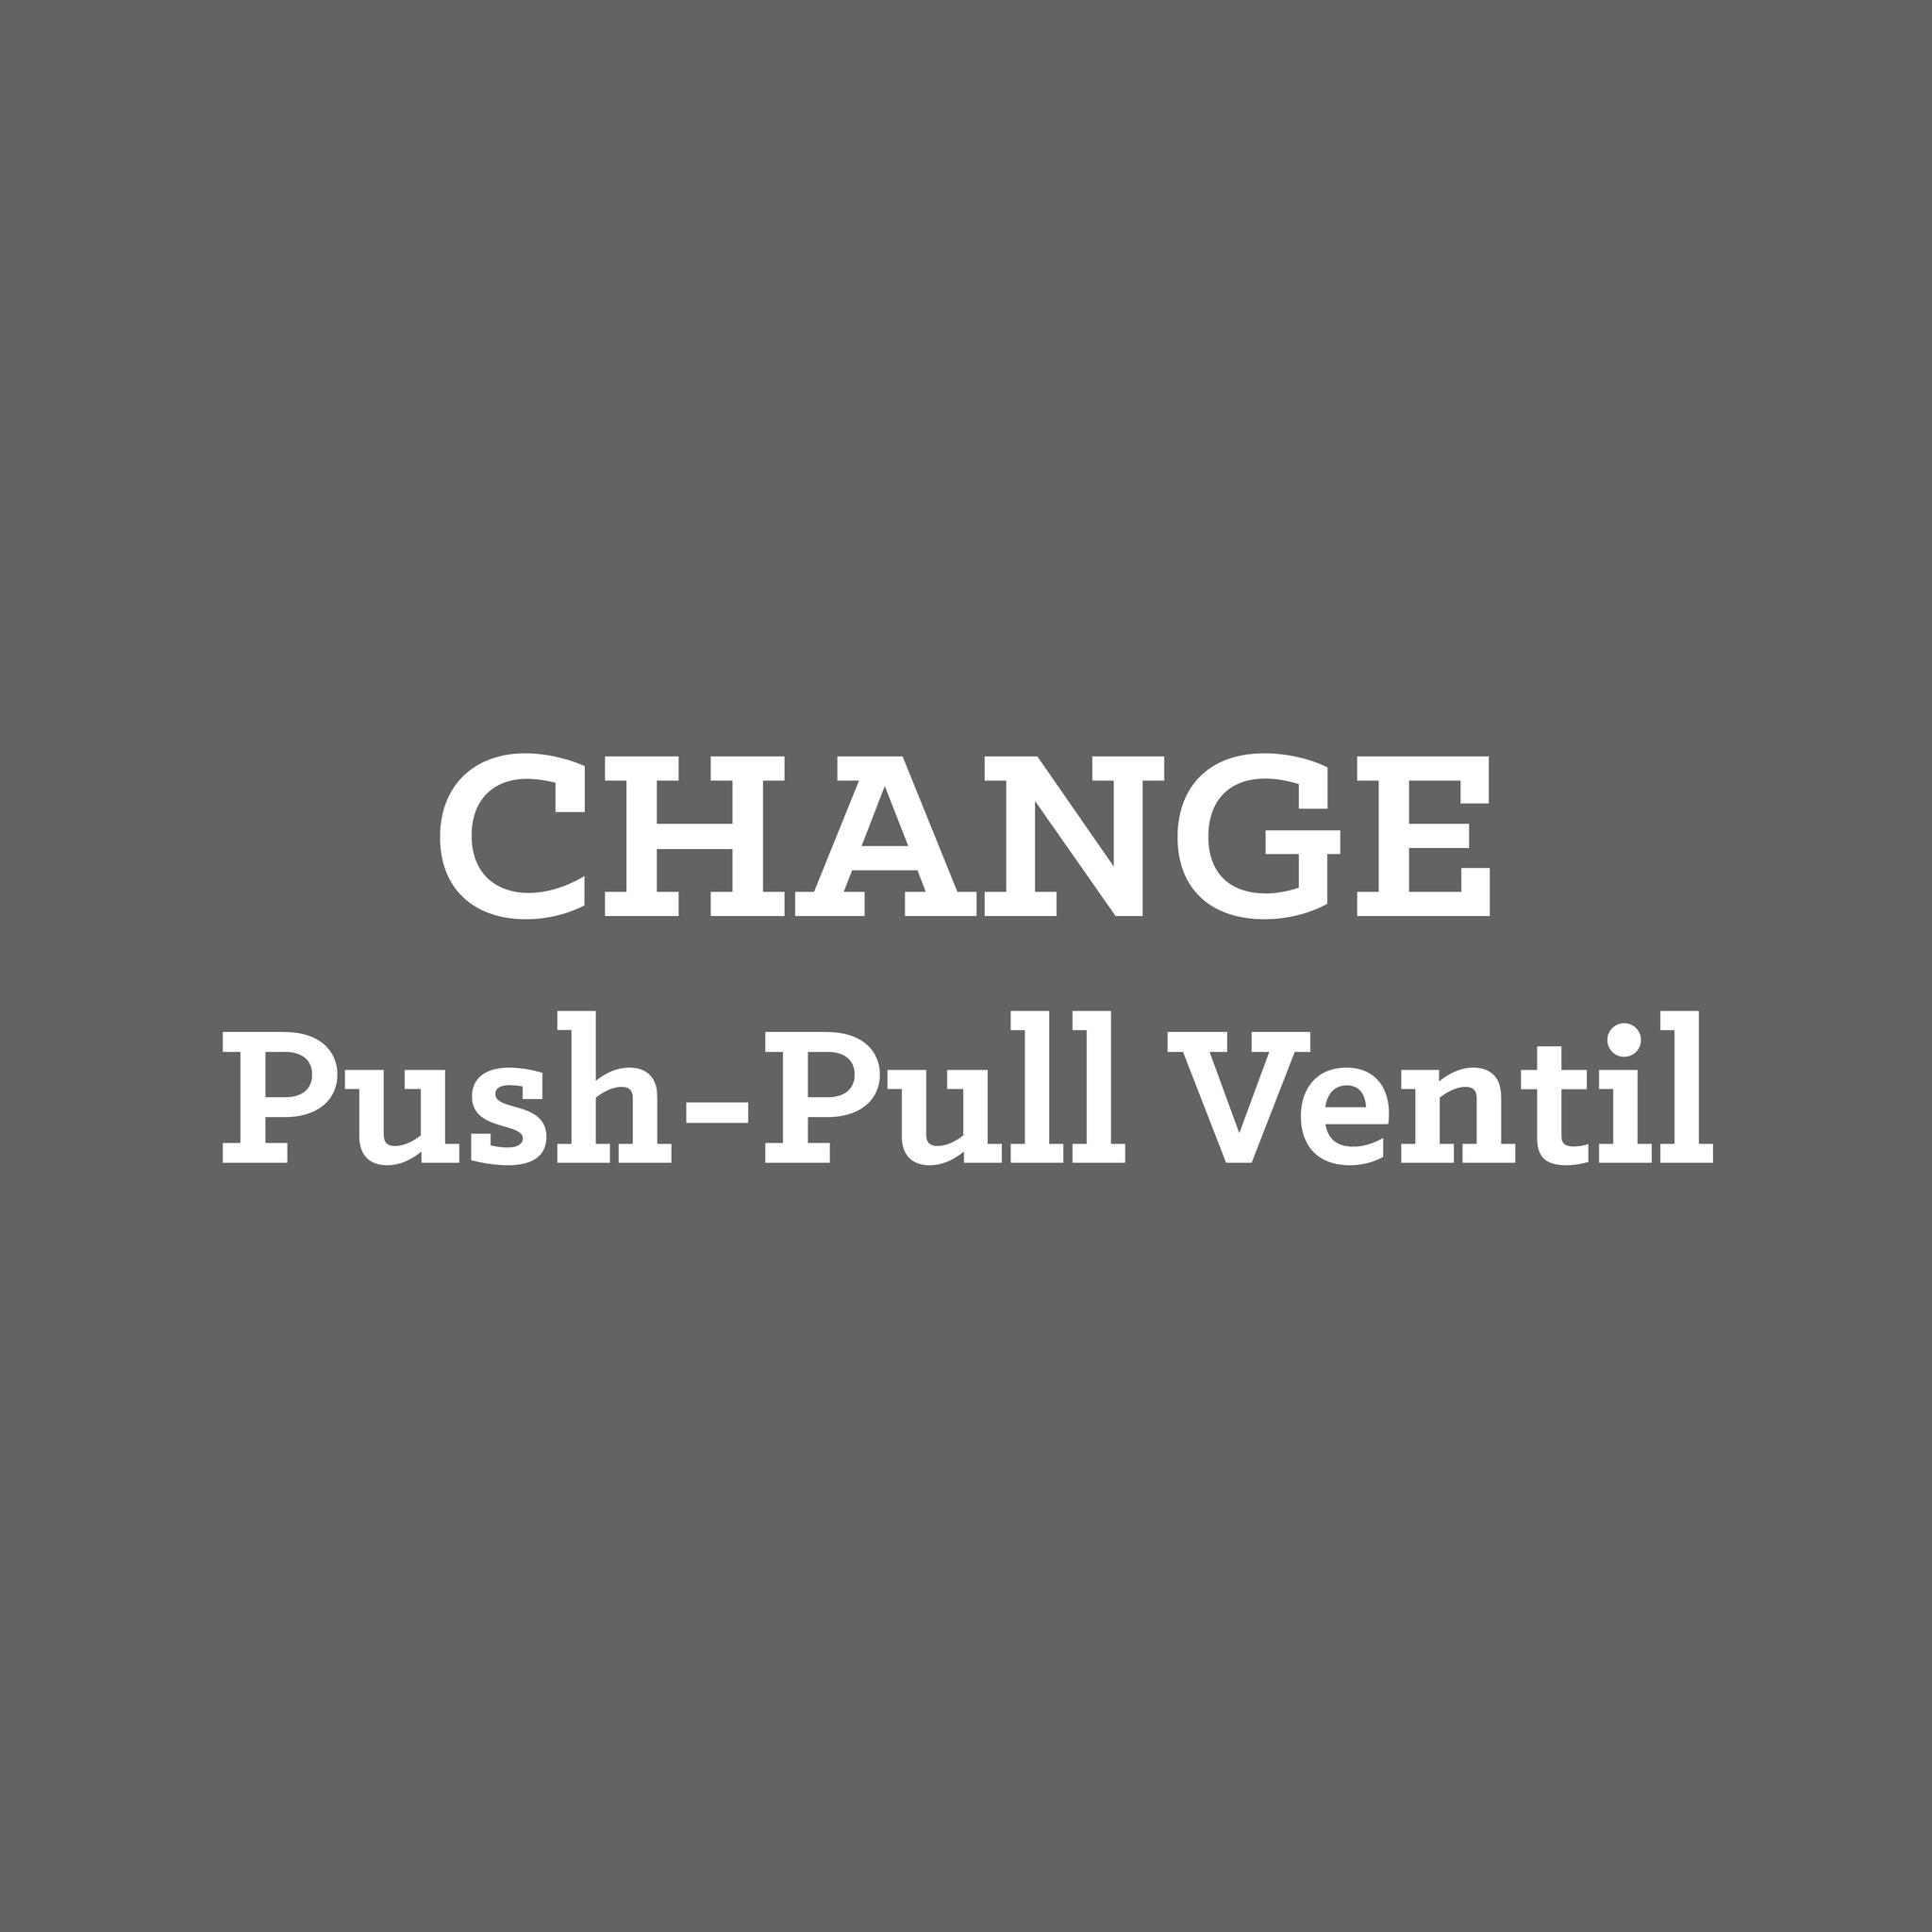 How to change your Push-Pull Ventil?